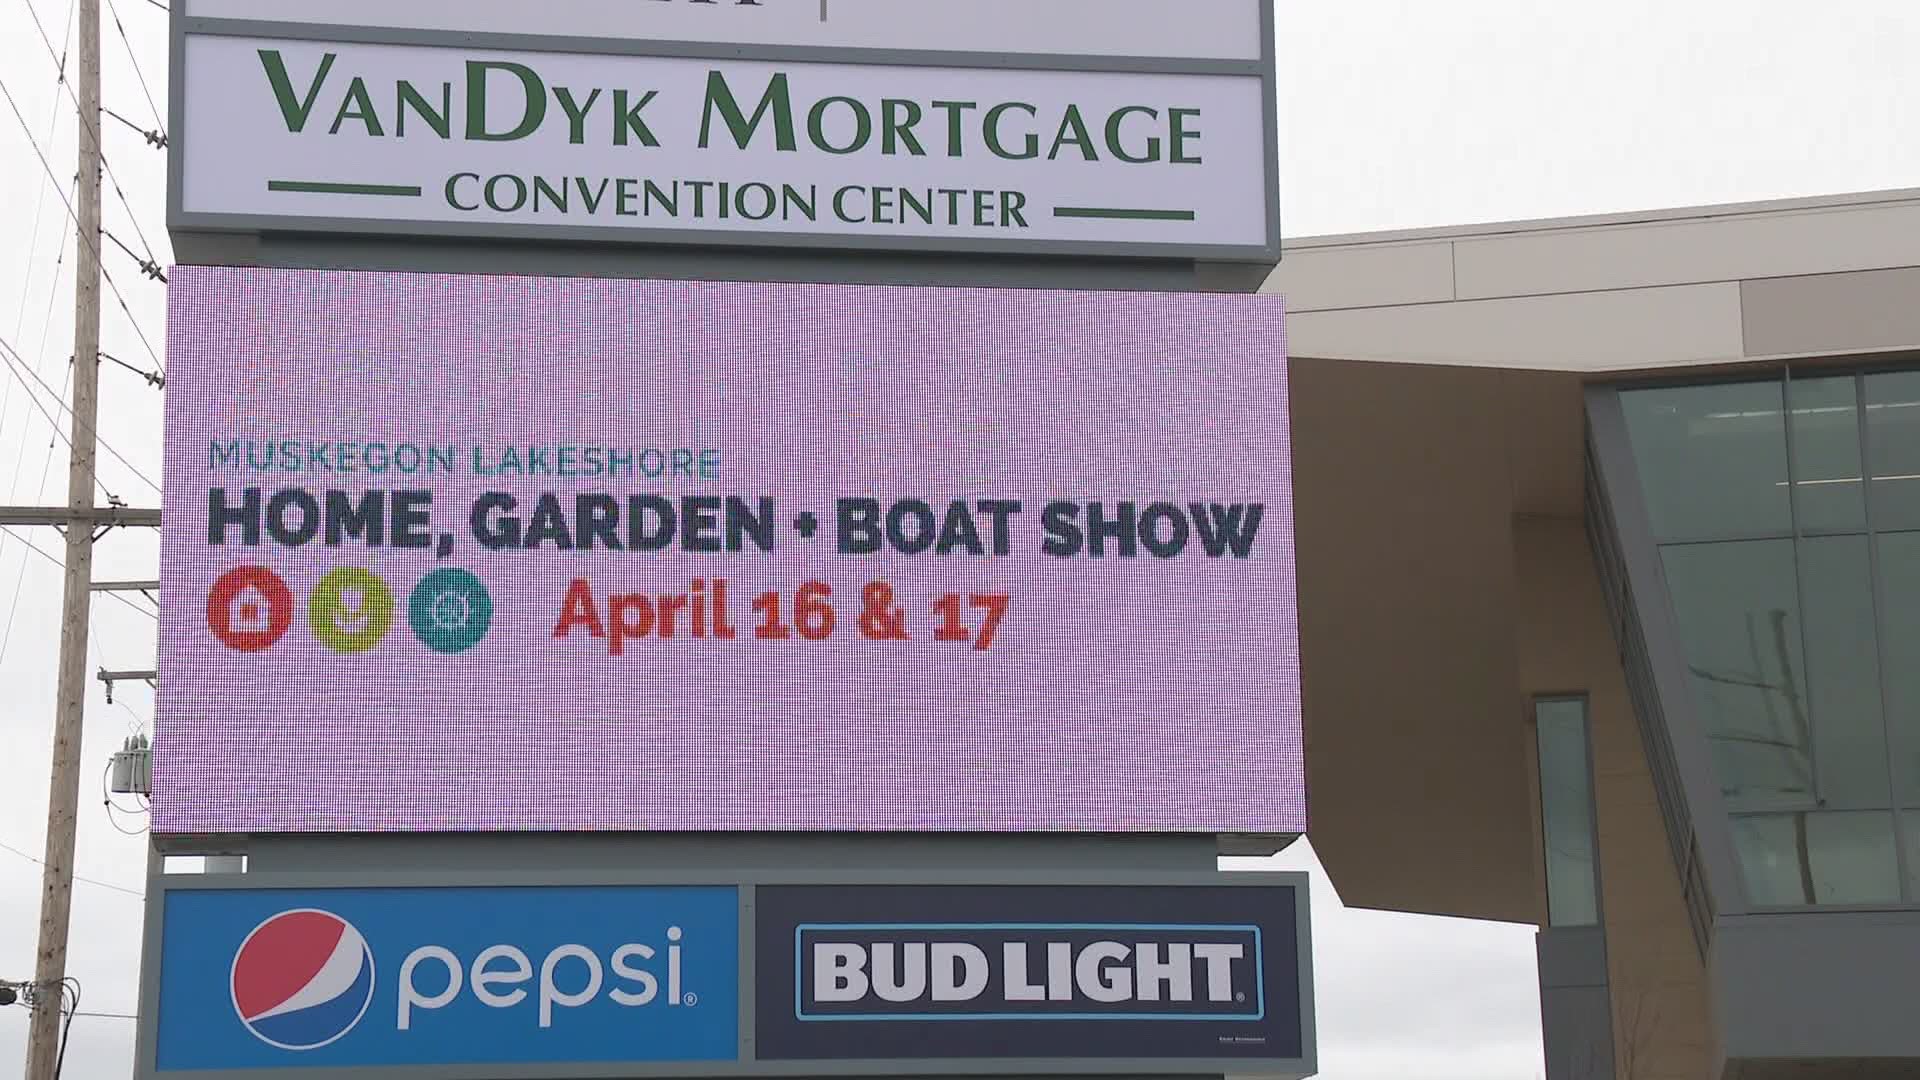 The Muskegon Lakeshore Home, Garden and Boat Show features 60 exhibitors from home improvement to landscaping.